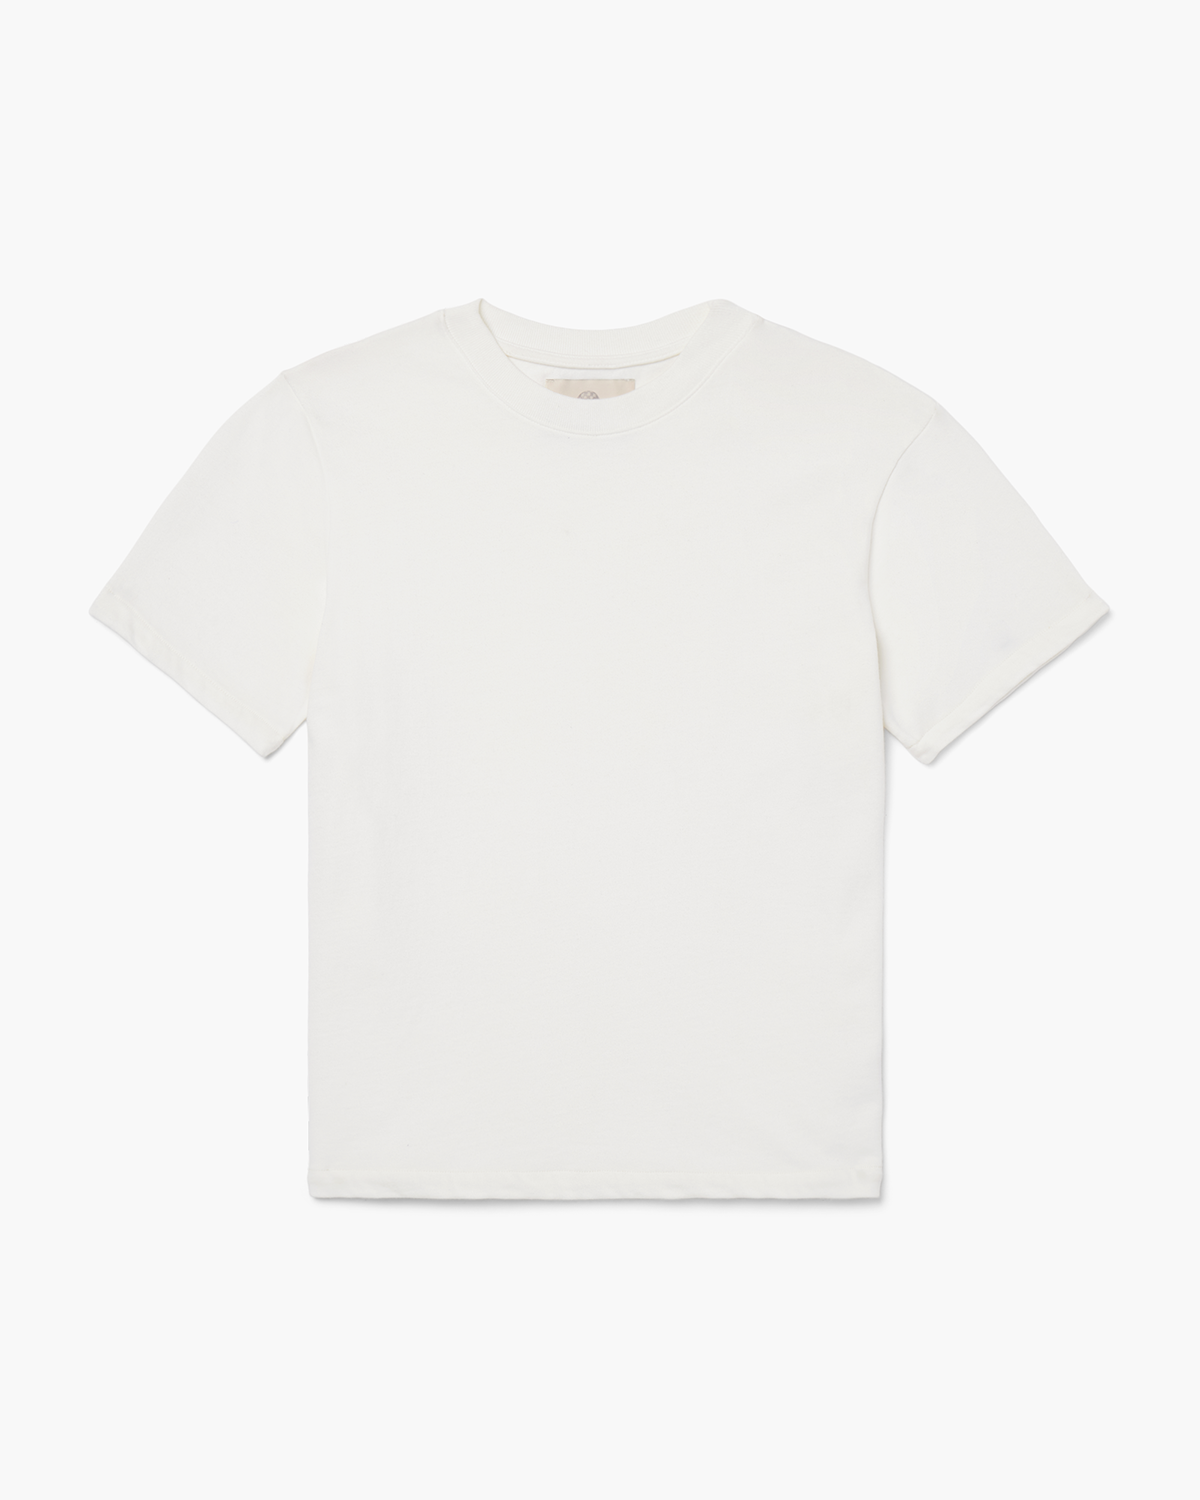 The Salo Tee In Off White